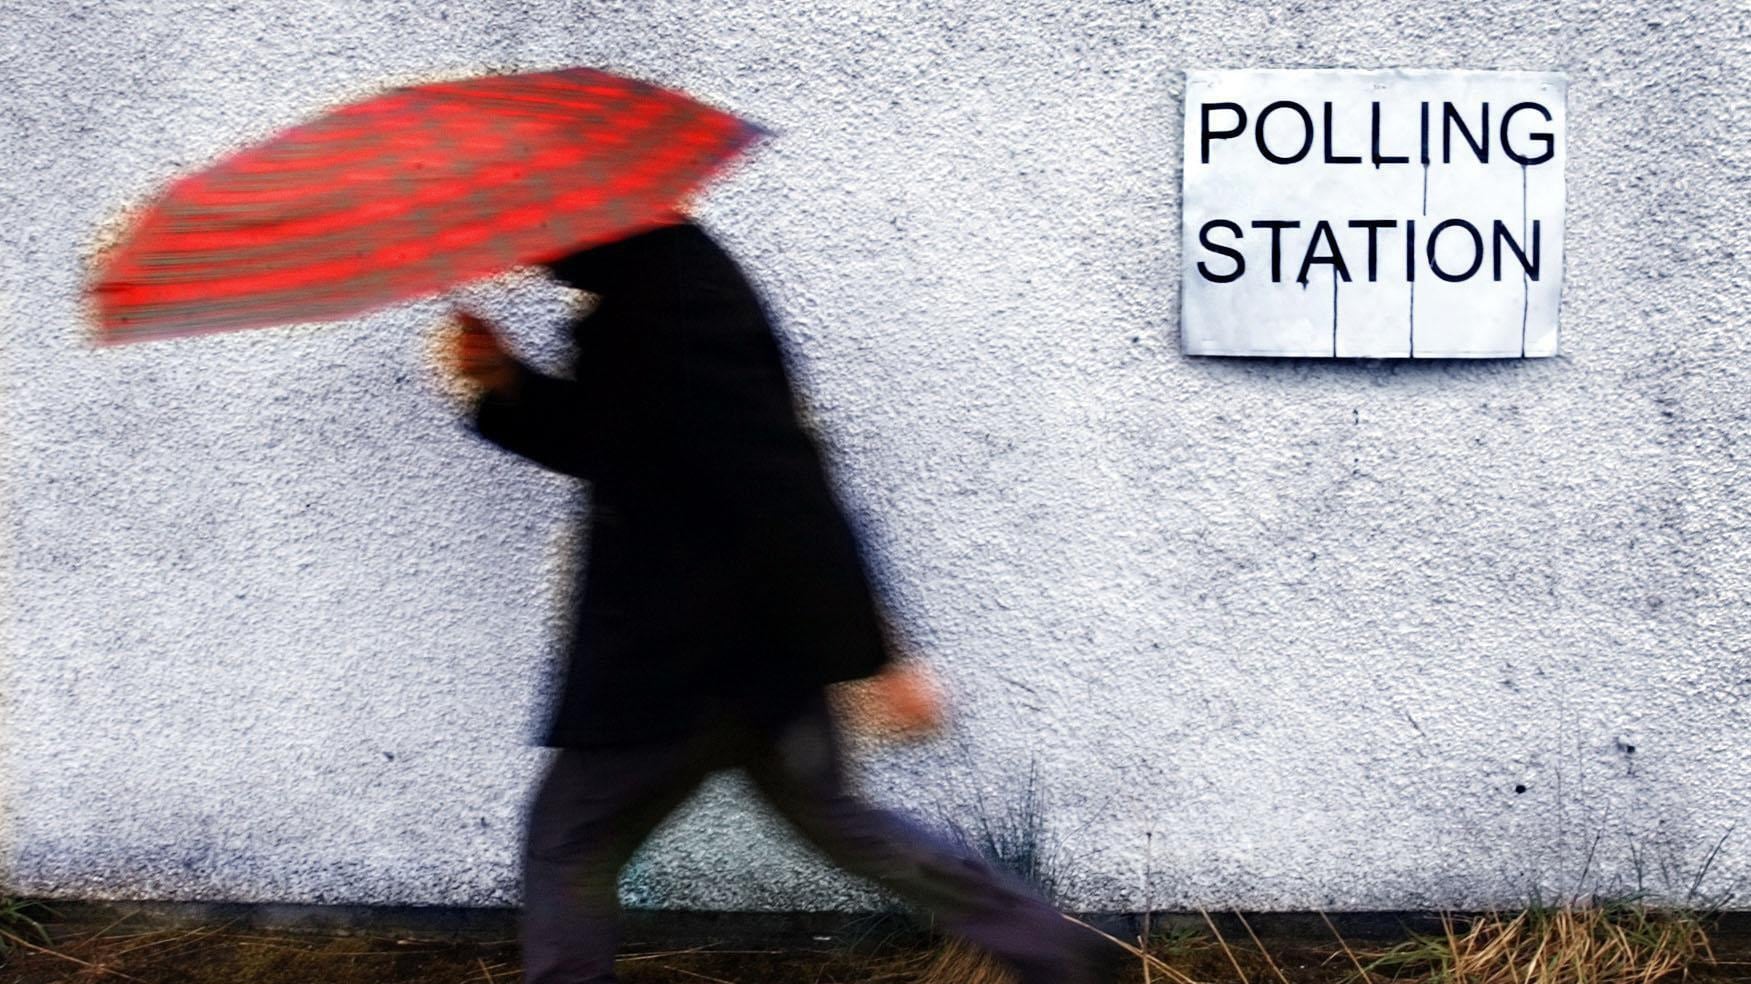 A man makes his way to a polling station in the rain